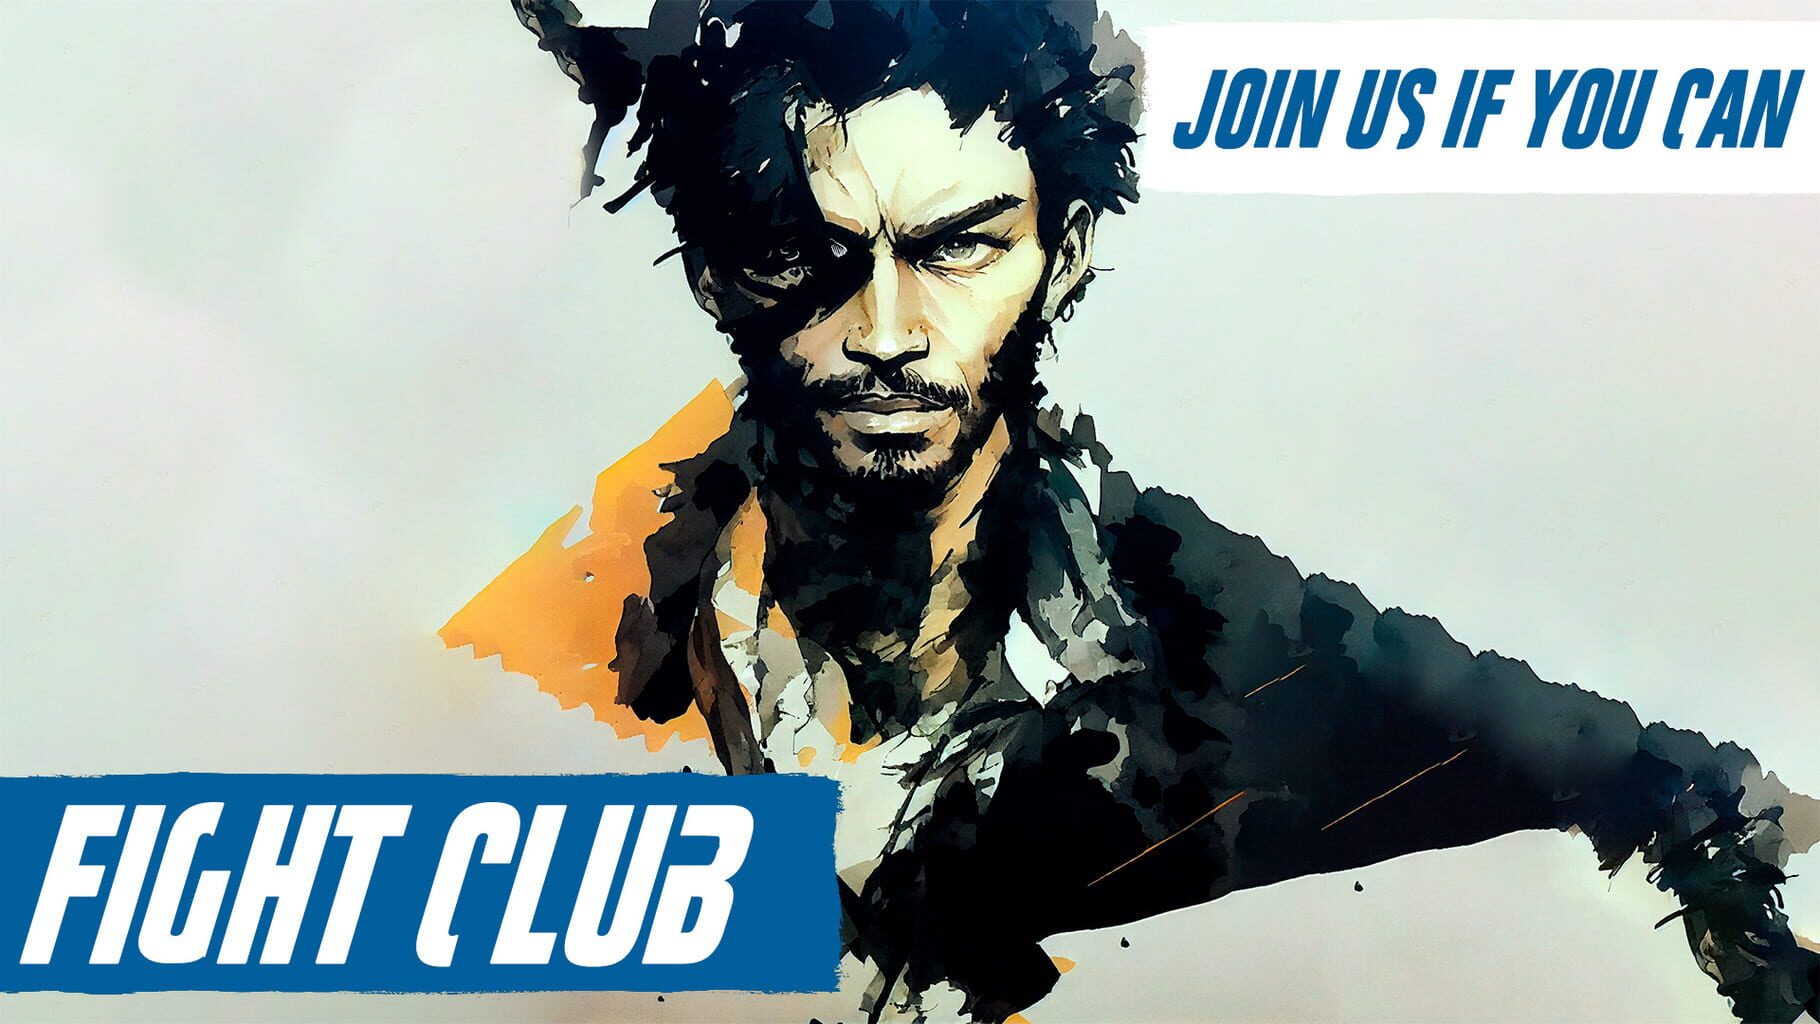 Fight Club: Join us if you can artwork